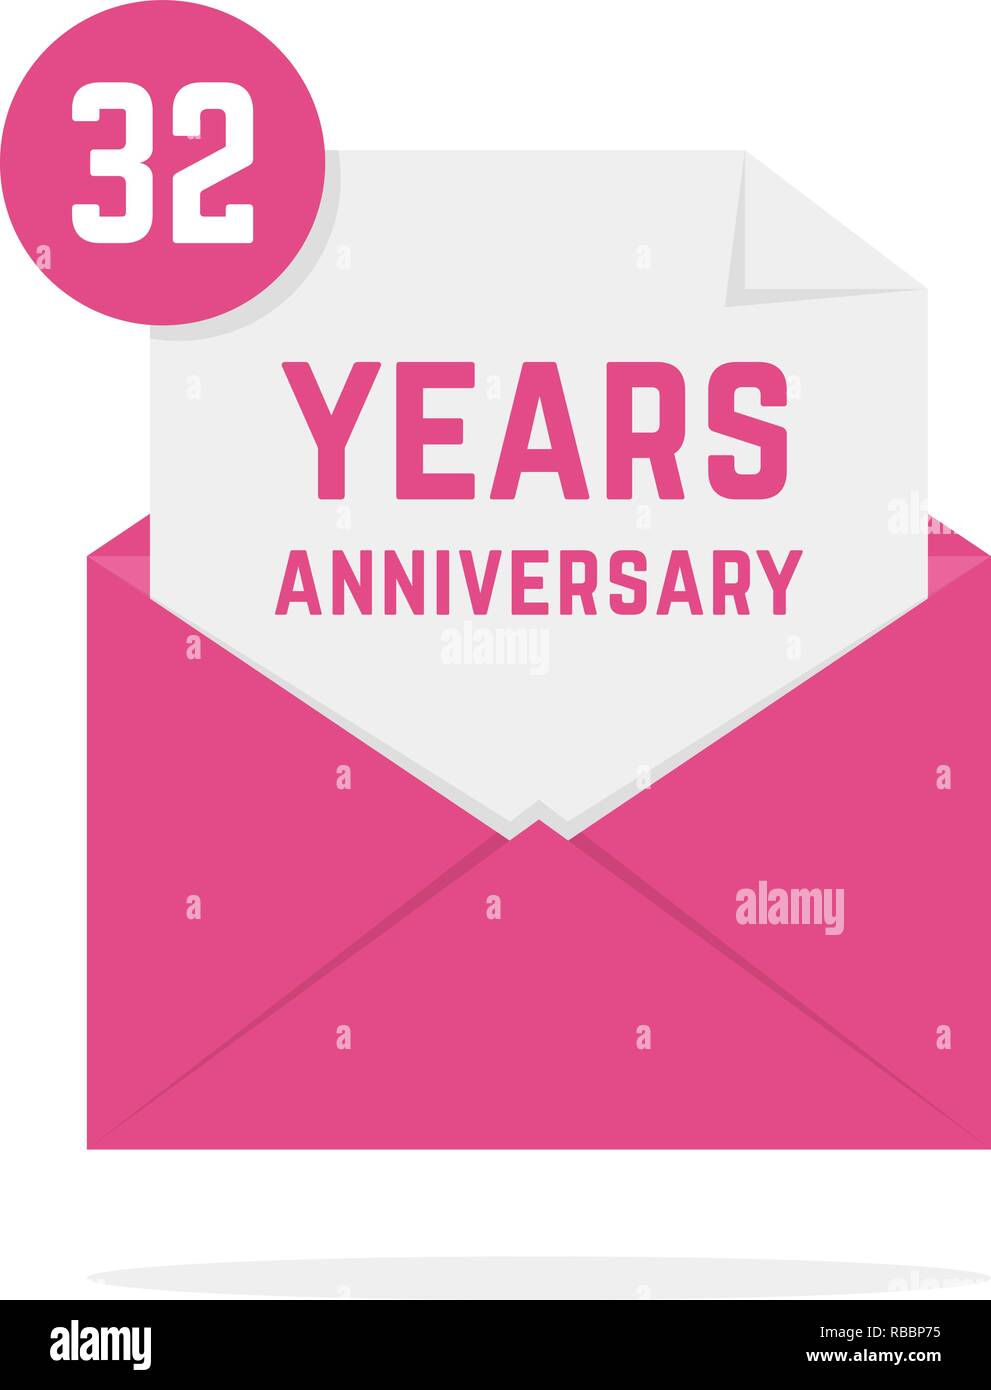 32 years anniversary icon in open letter Stock Vector